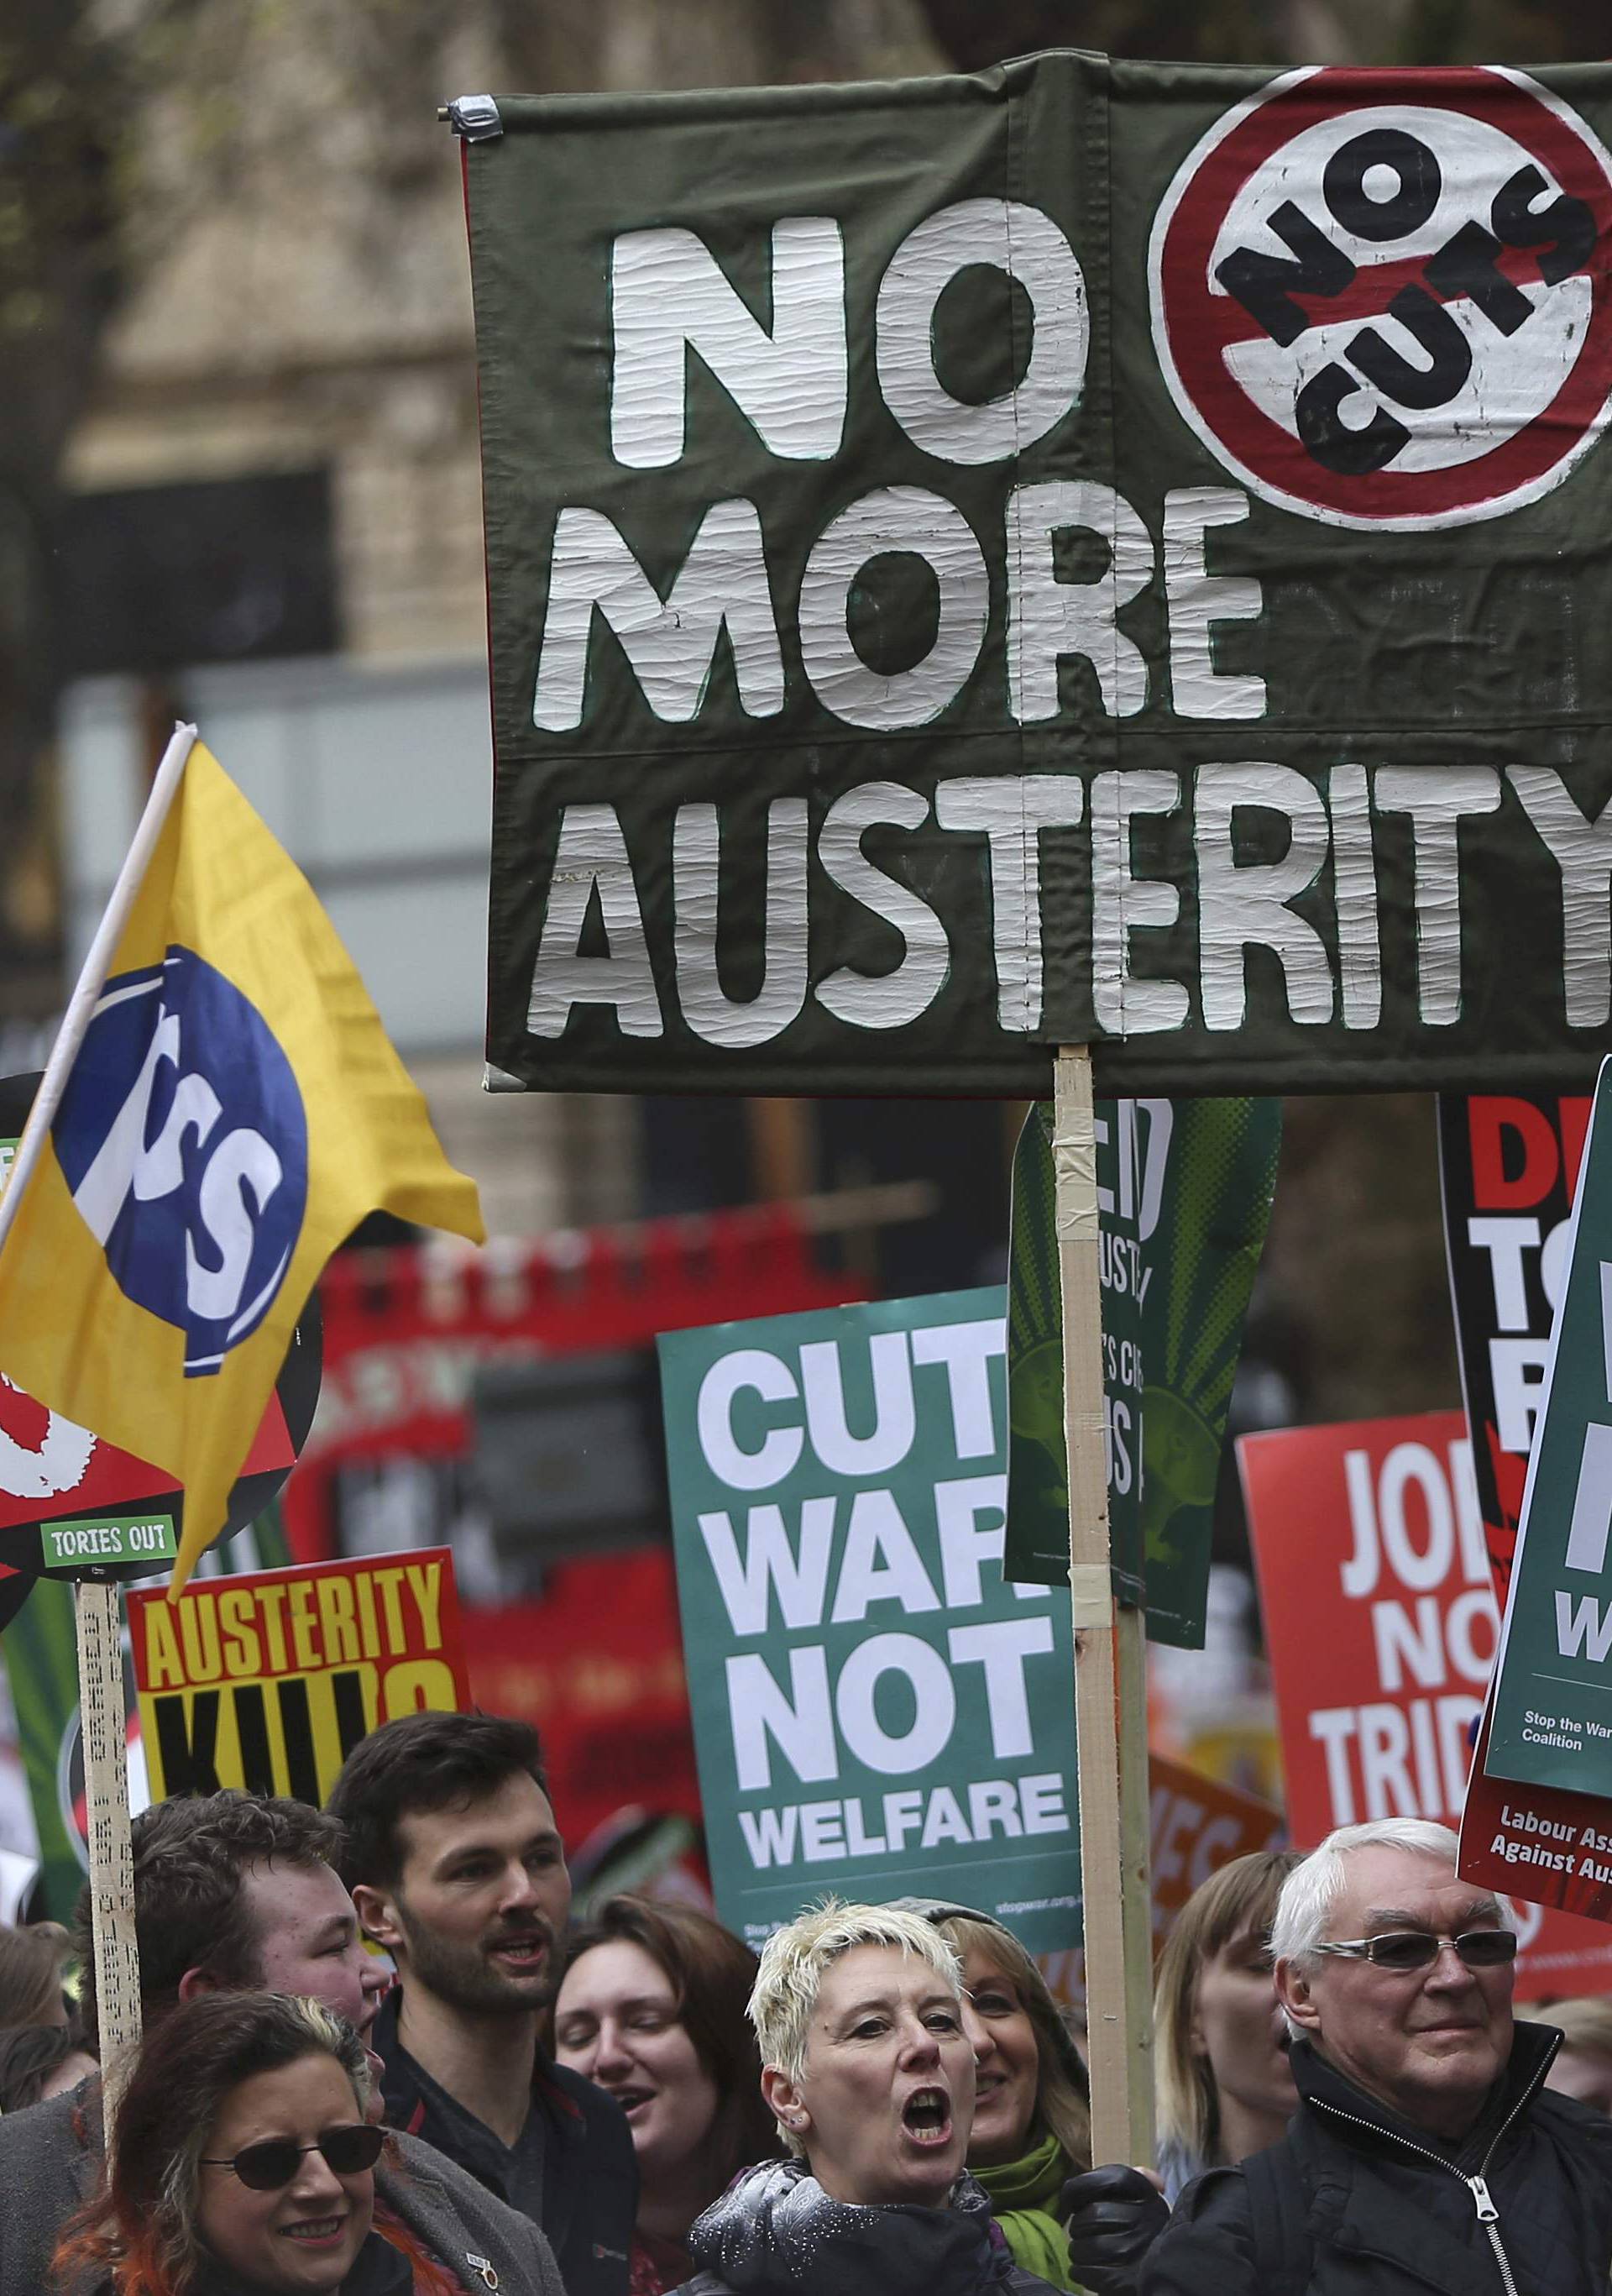 Demonstrators hold placards during an anti-austerity protest in London